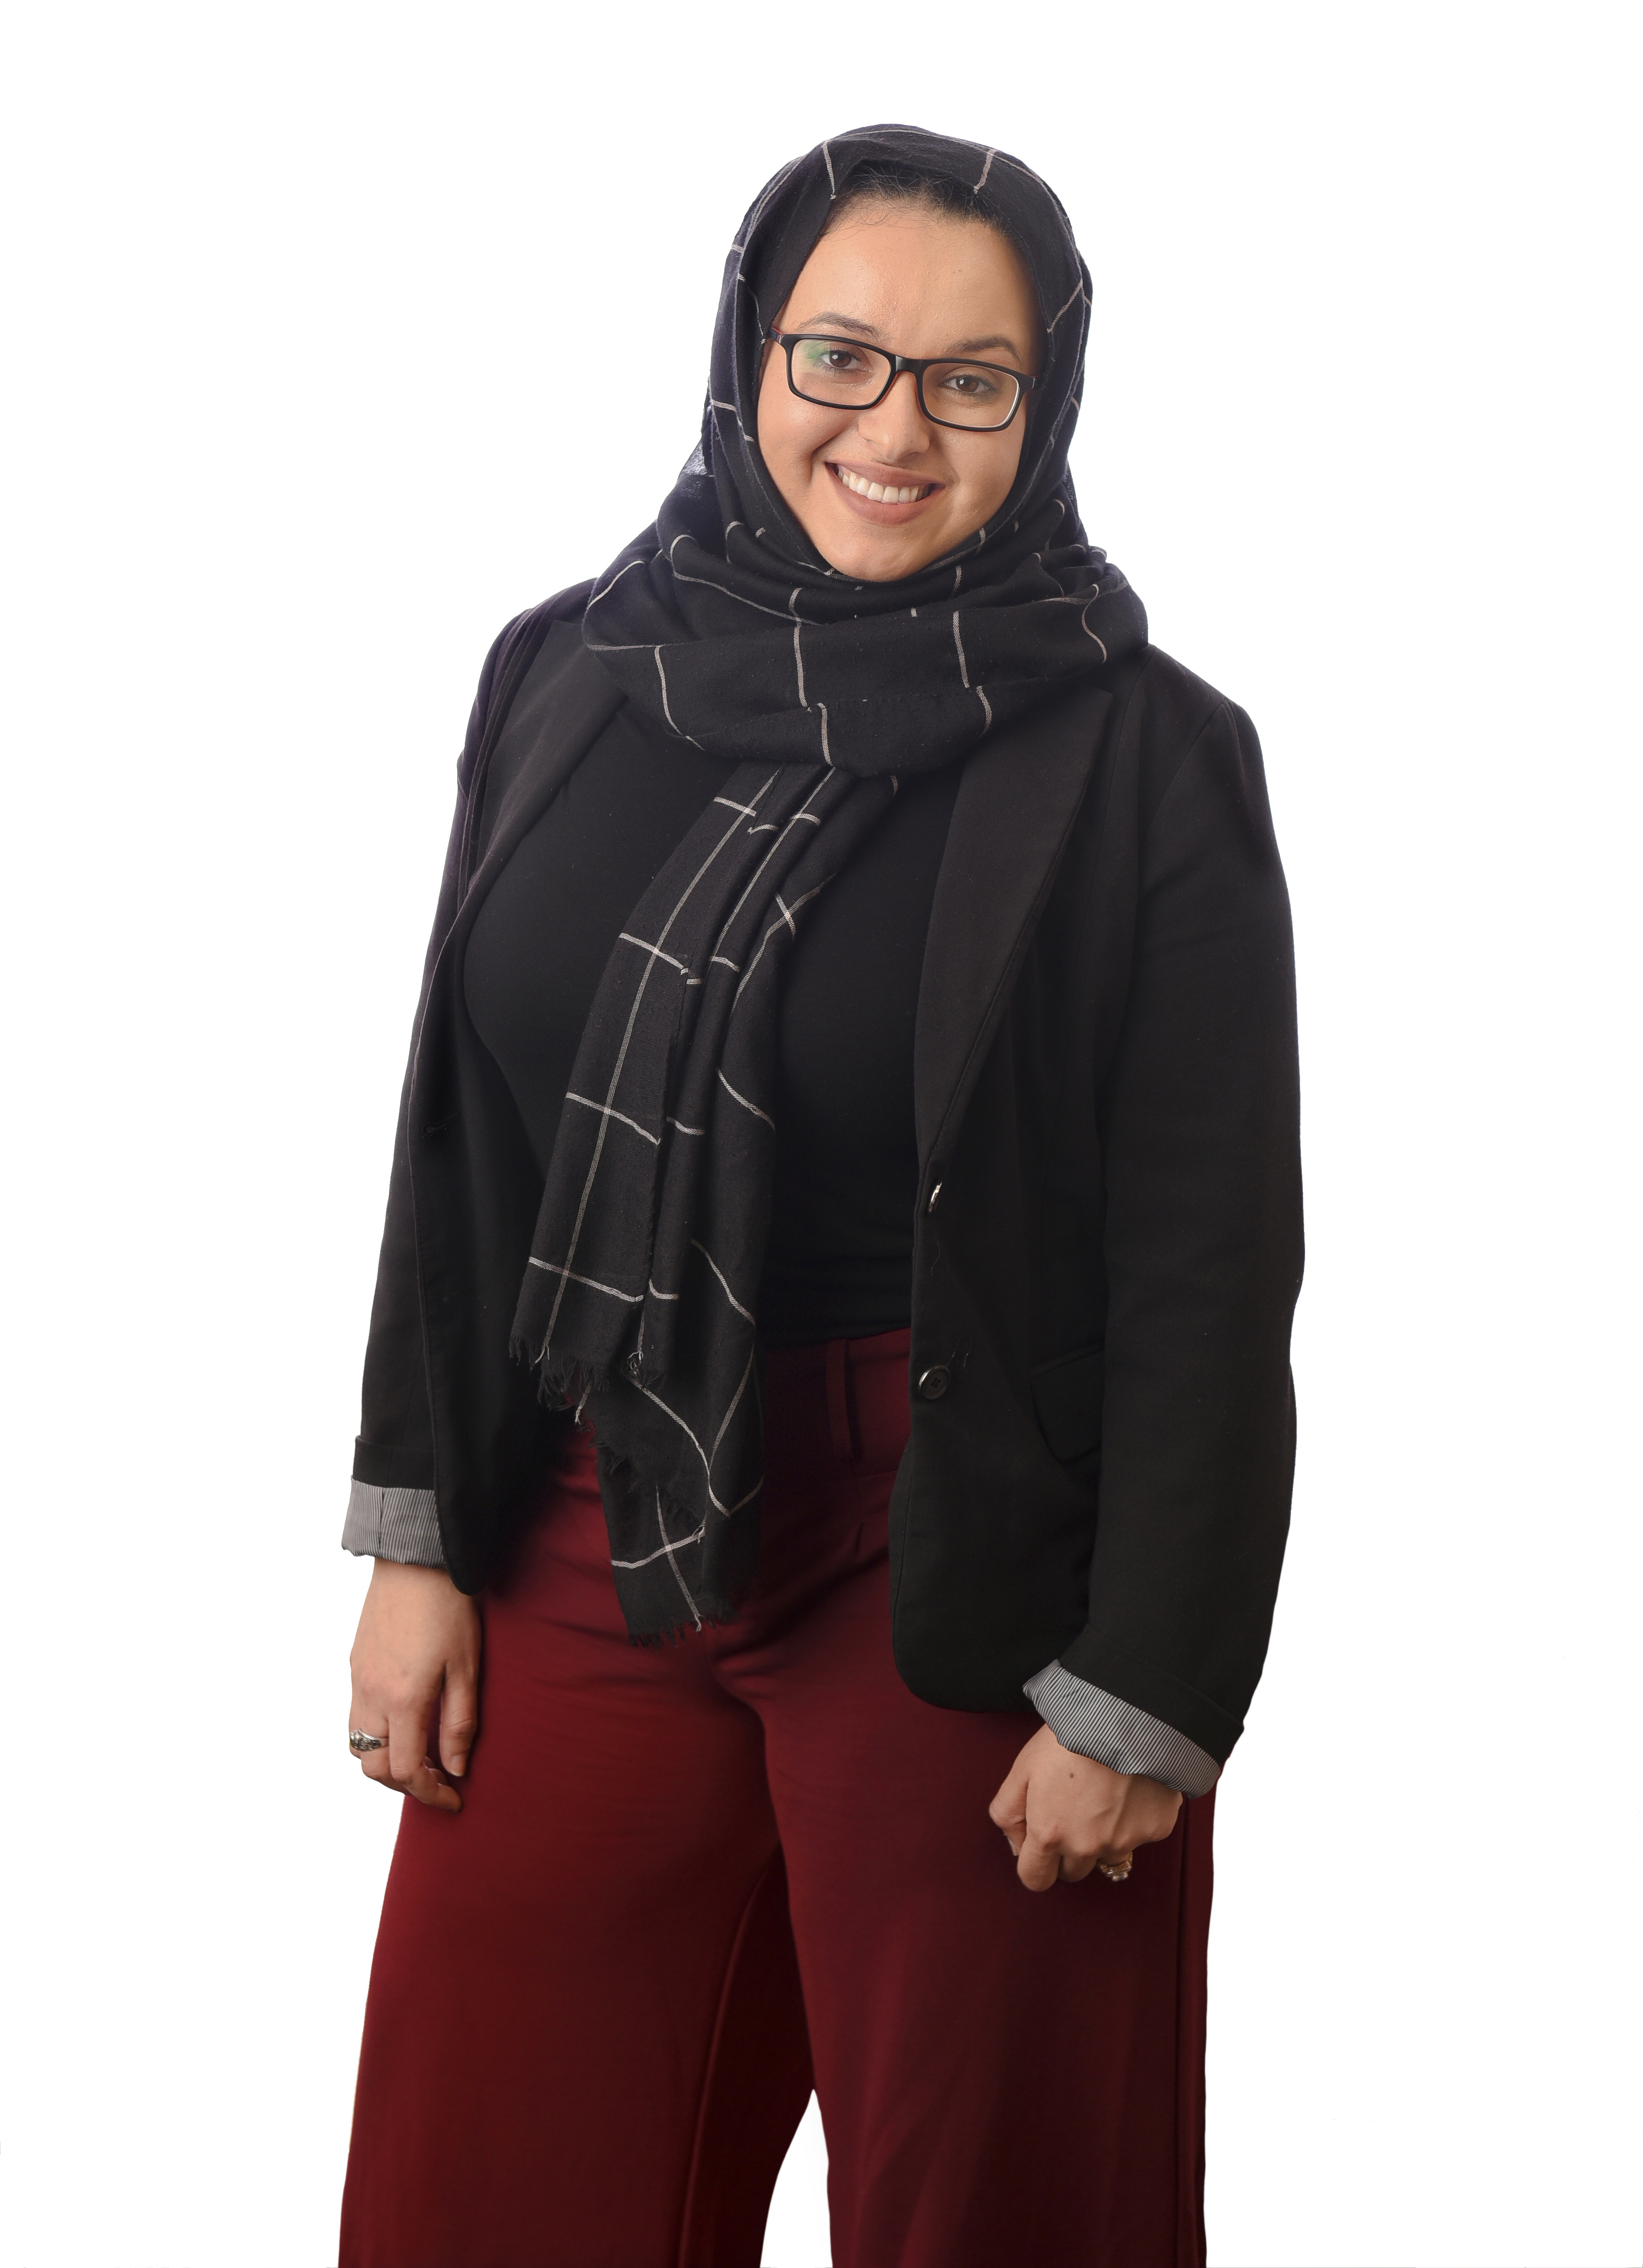 Photo by BENJAMIN KRAIN --03/26/18--Graduate student Nora Bouzihay brought the Human Library project to the UALR campus. Bouzihay is from Morocco and studied in Dubai.